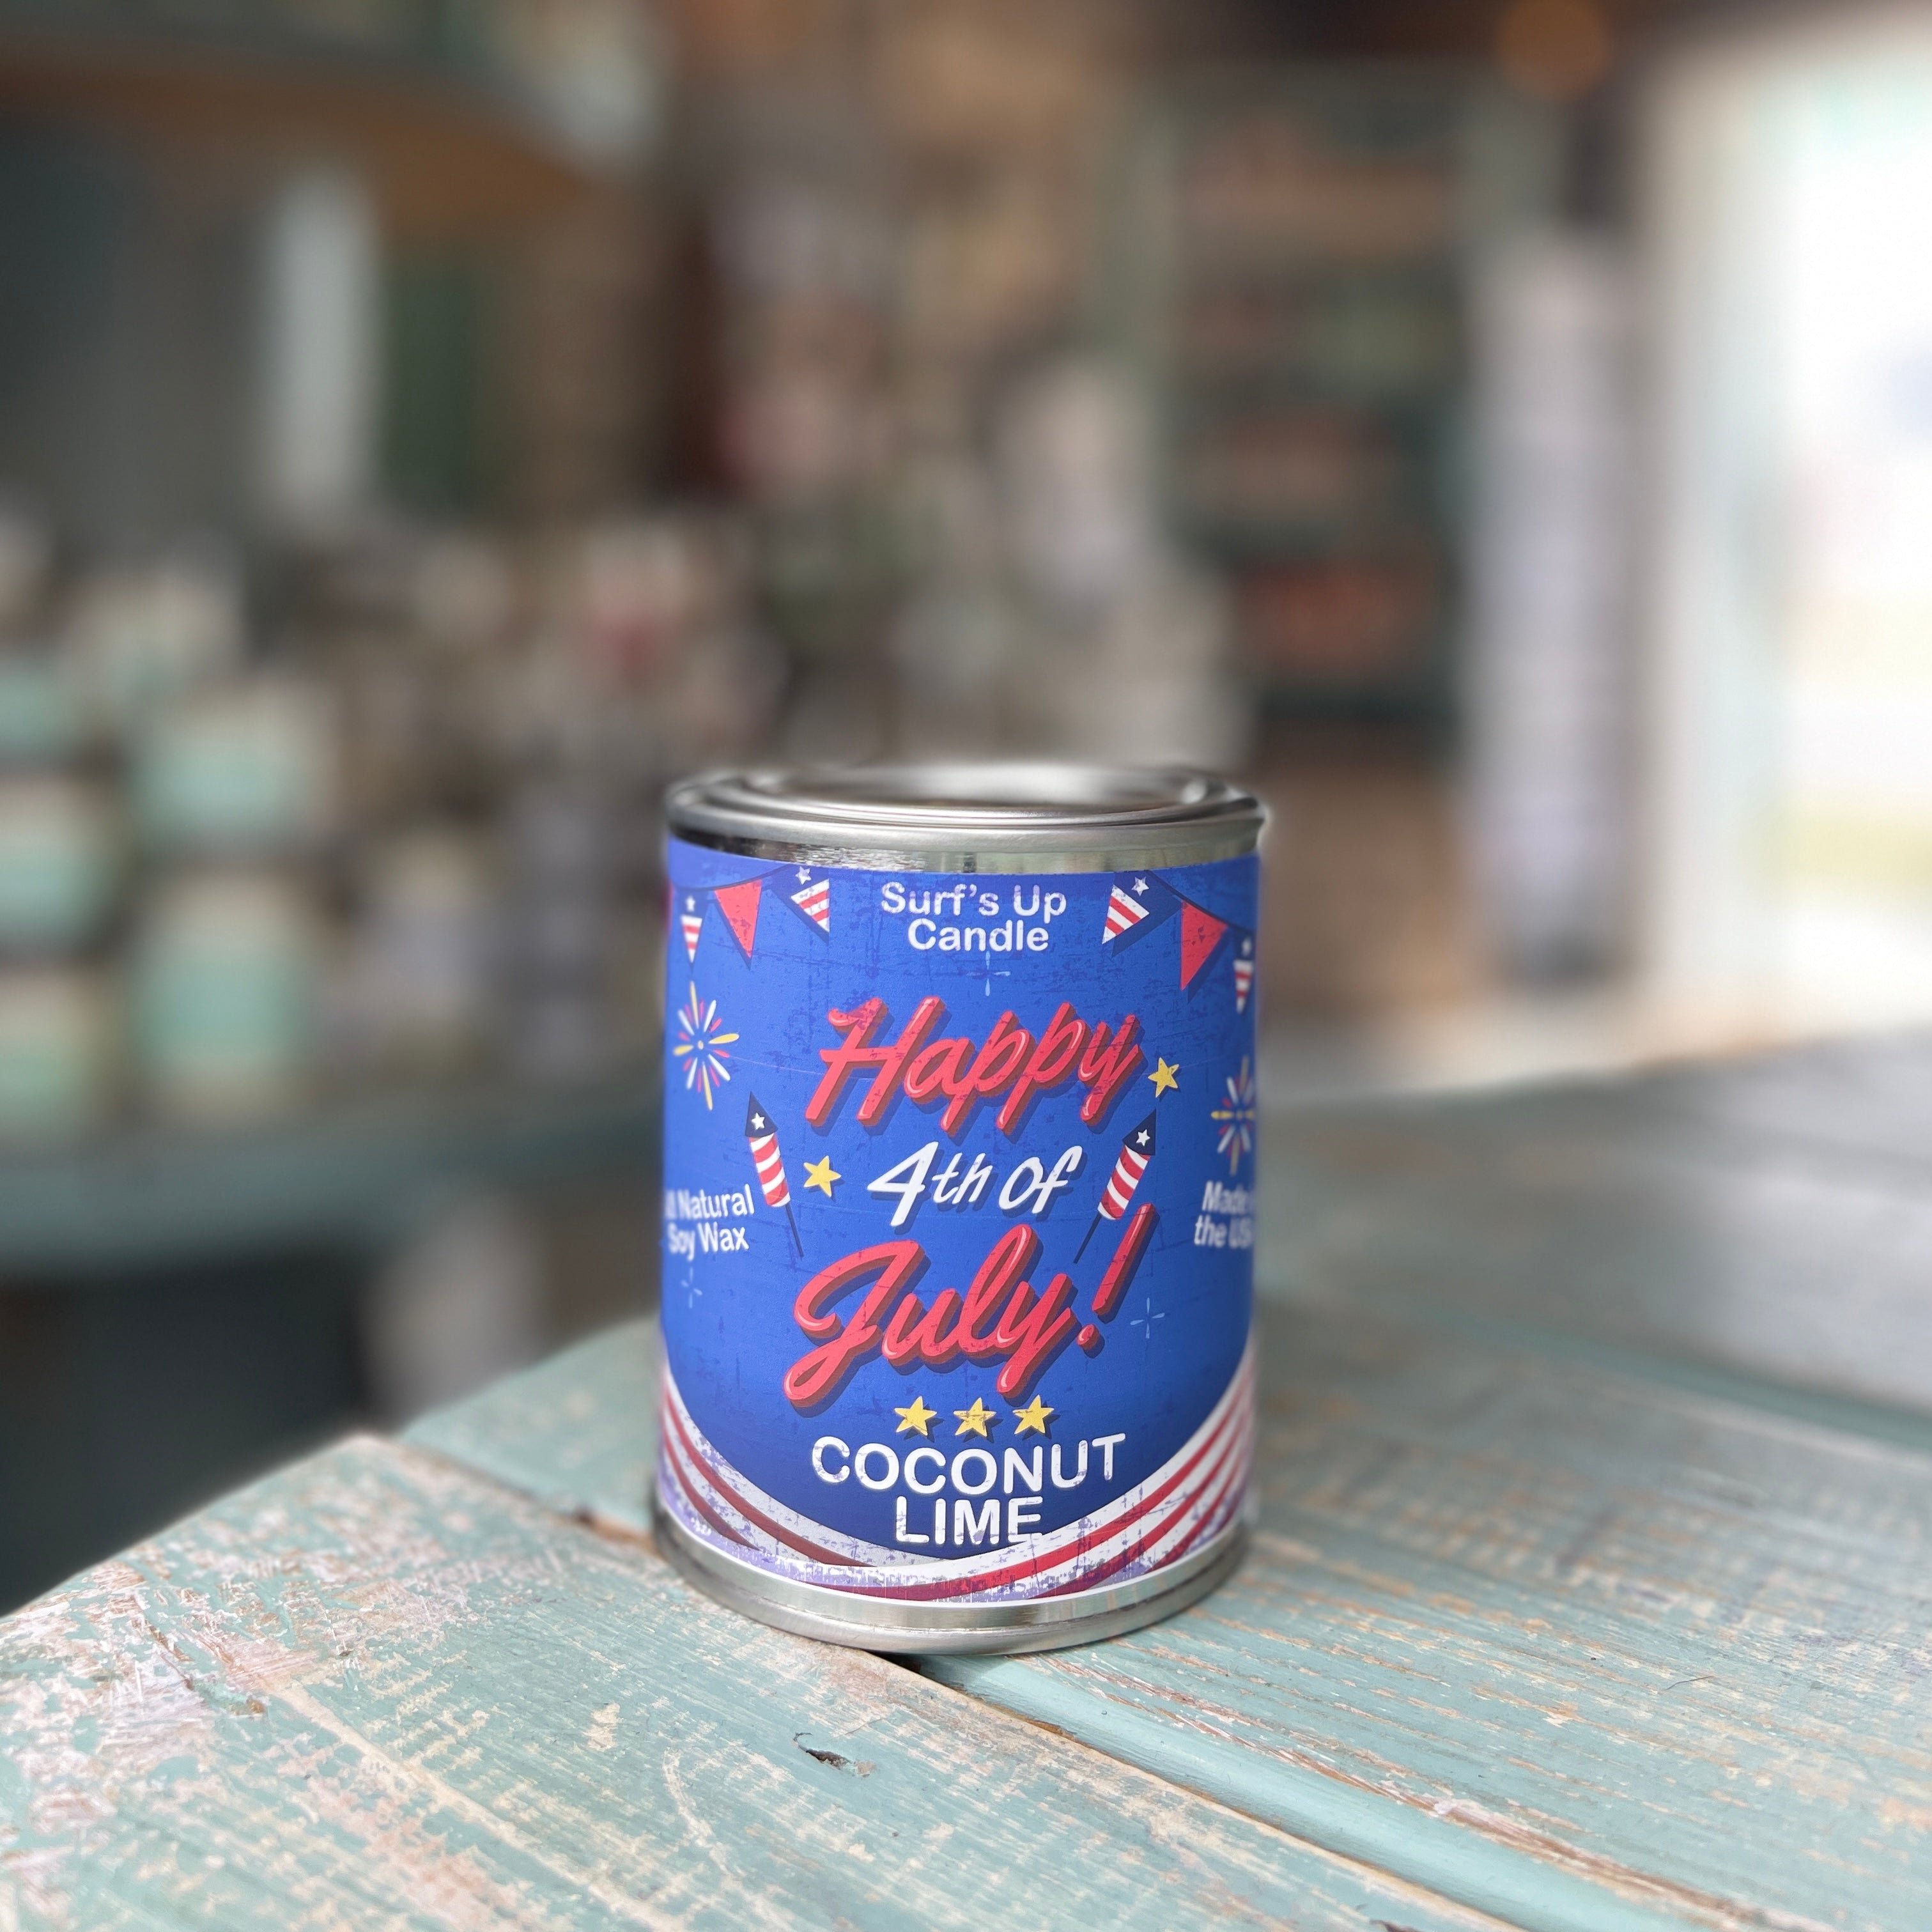 Happy 4th of July Paint Can Candle Trio - Americana Collection